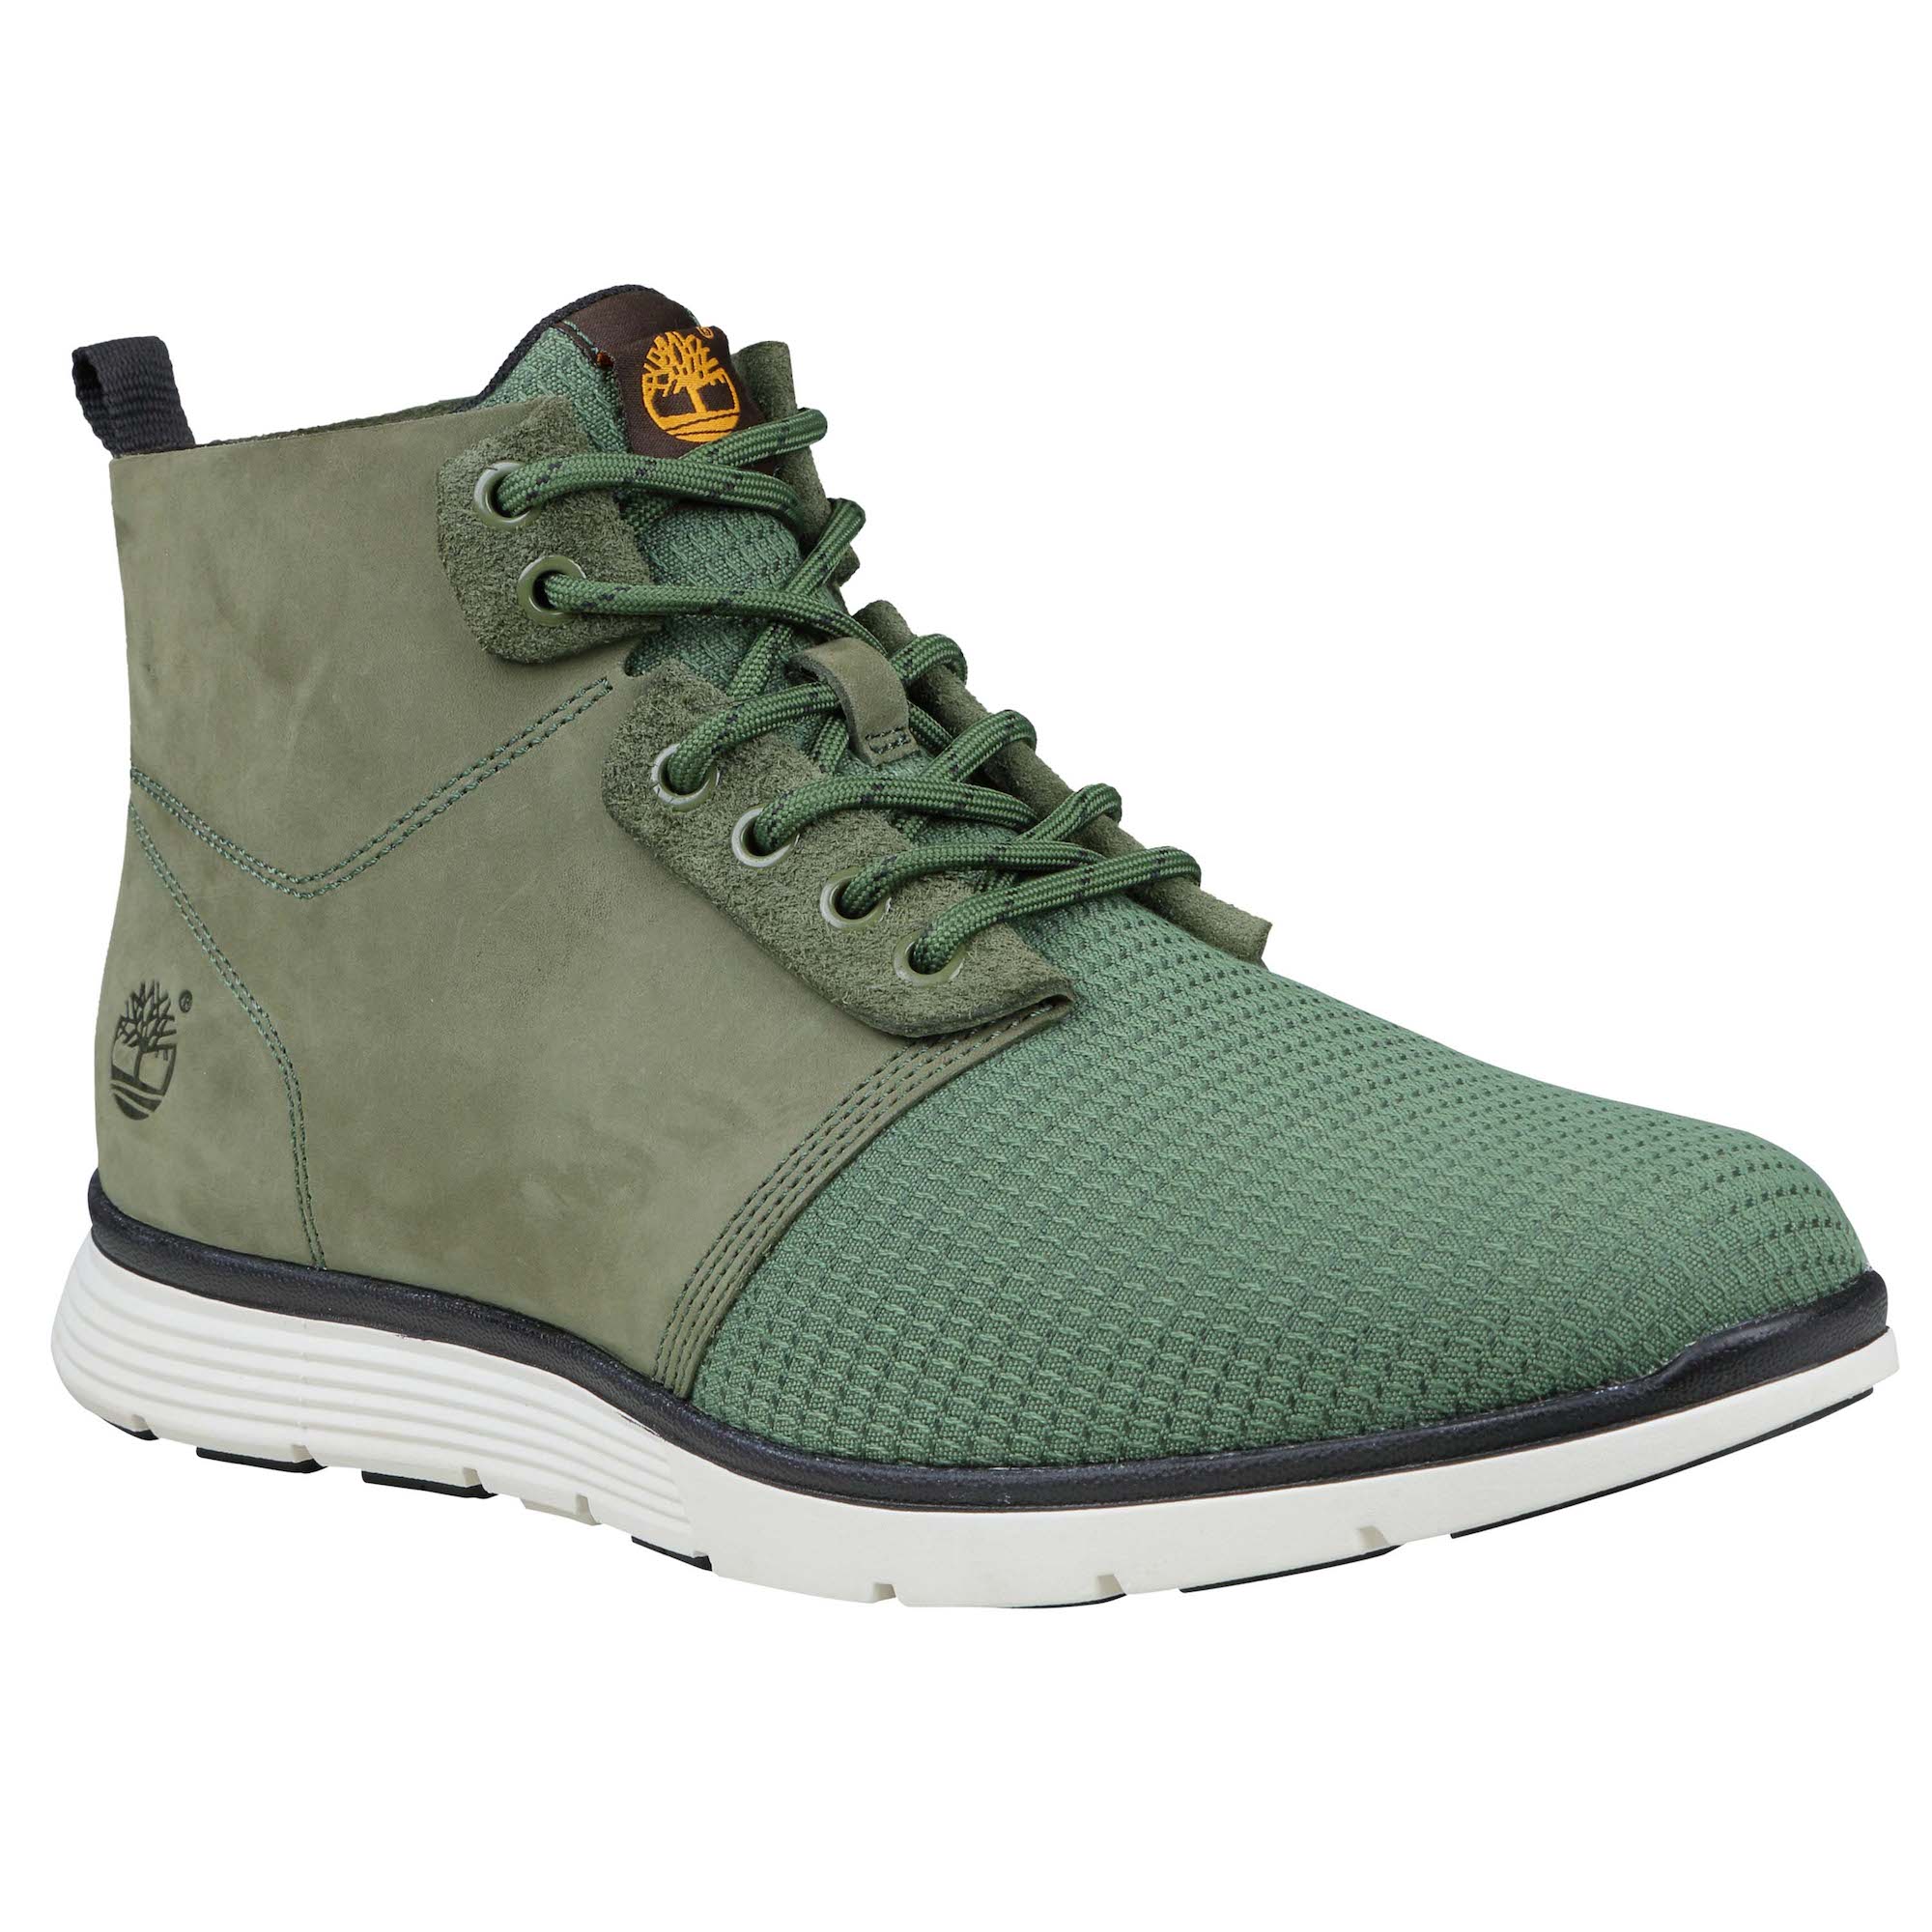 Timberland’s Killington Sneakerboots Takes You Everywhere – JUICEOnline.com